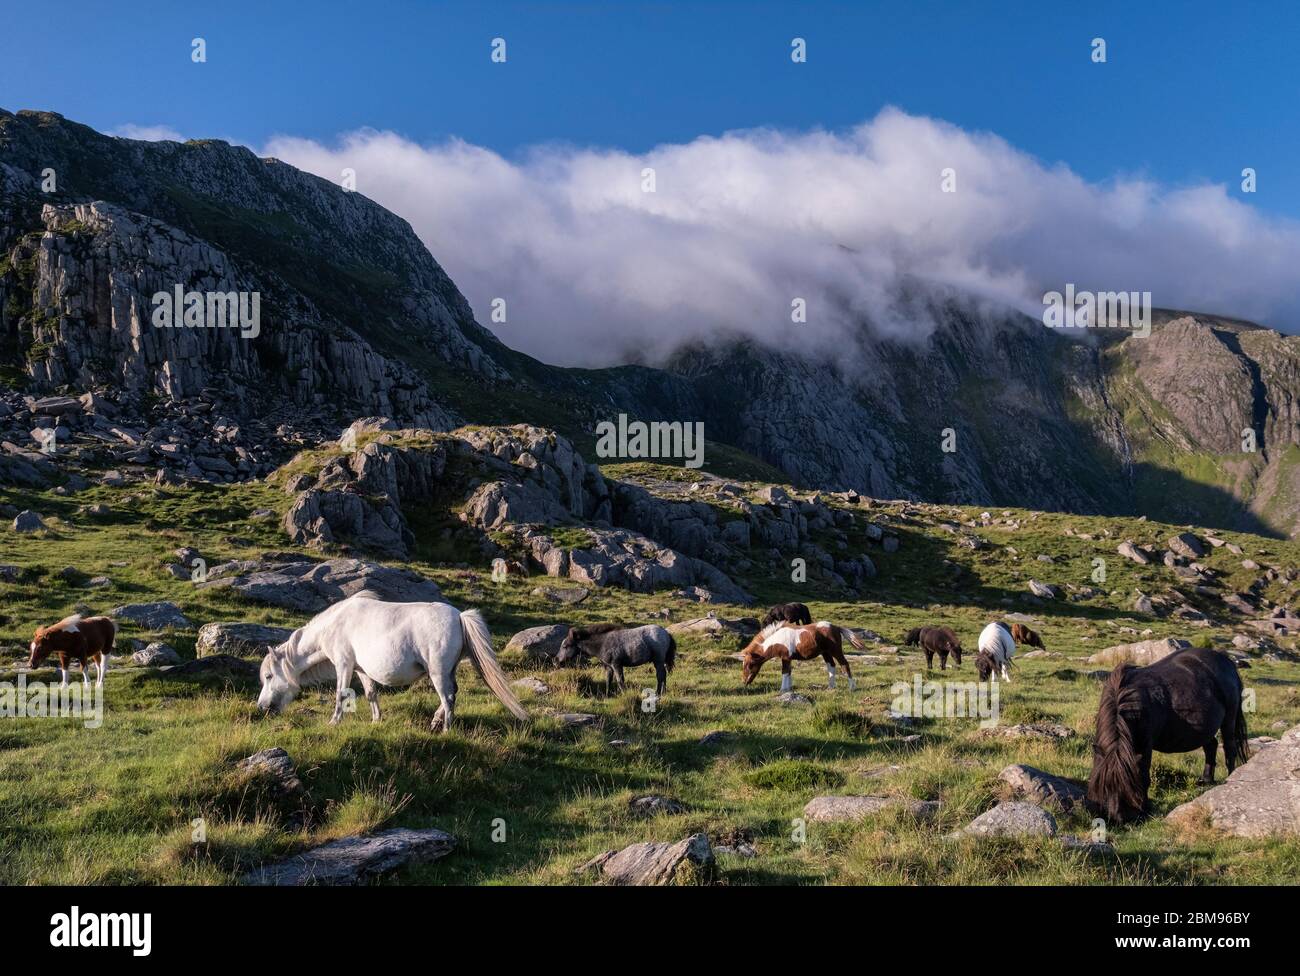 Wild Welsh Ponies in Cwm Idwal backed by The Glyderau Mountains, Snowdonia National Park, North Wales, UK Stock Photo